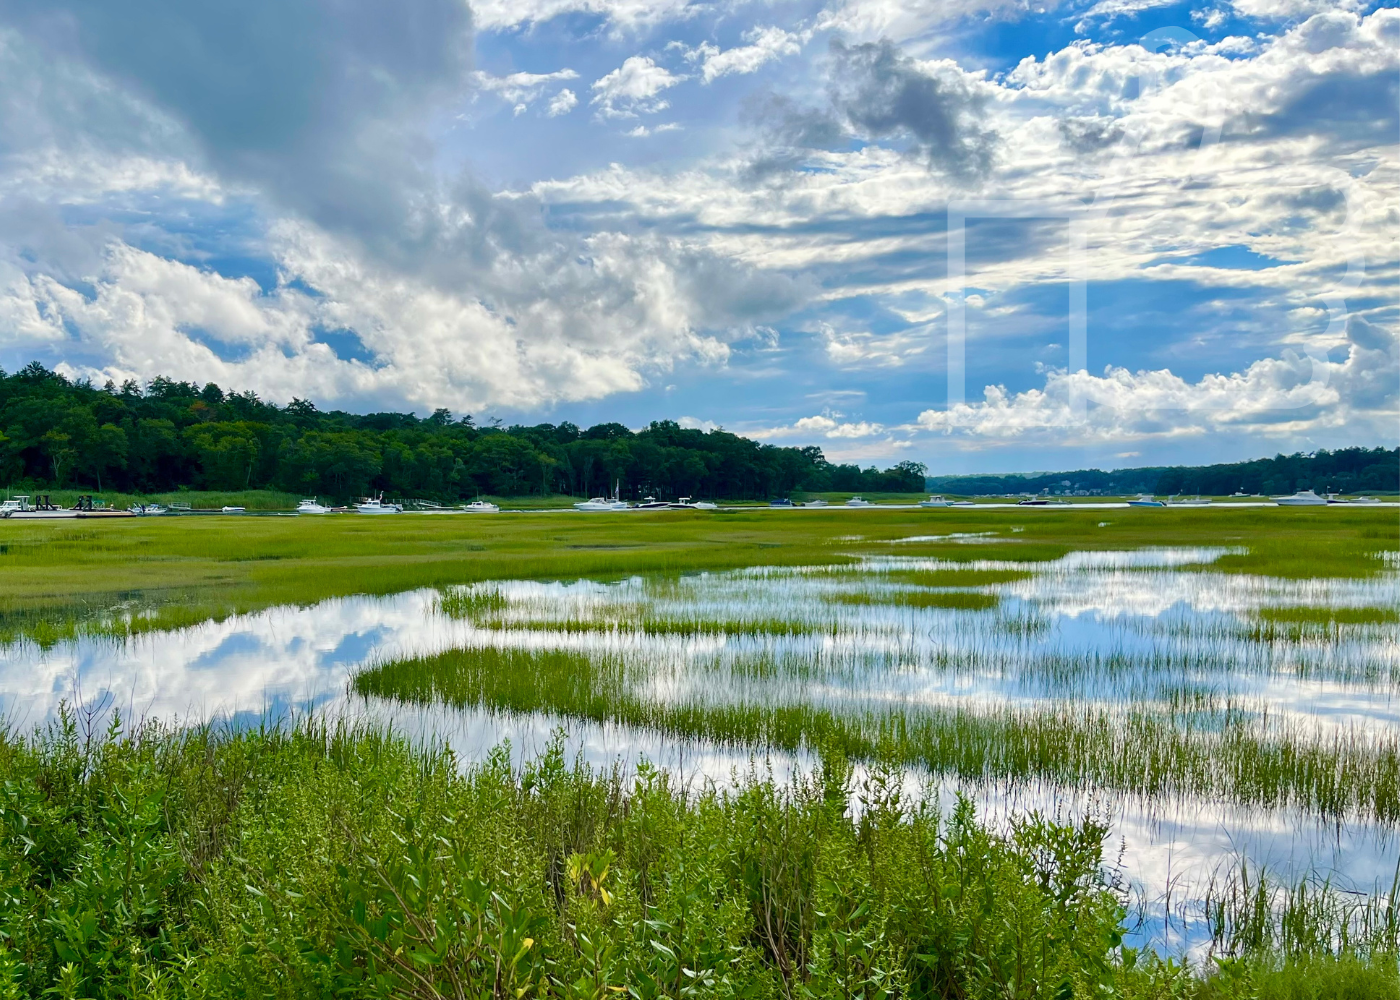 "Clouds on the River" - Scituate, MA